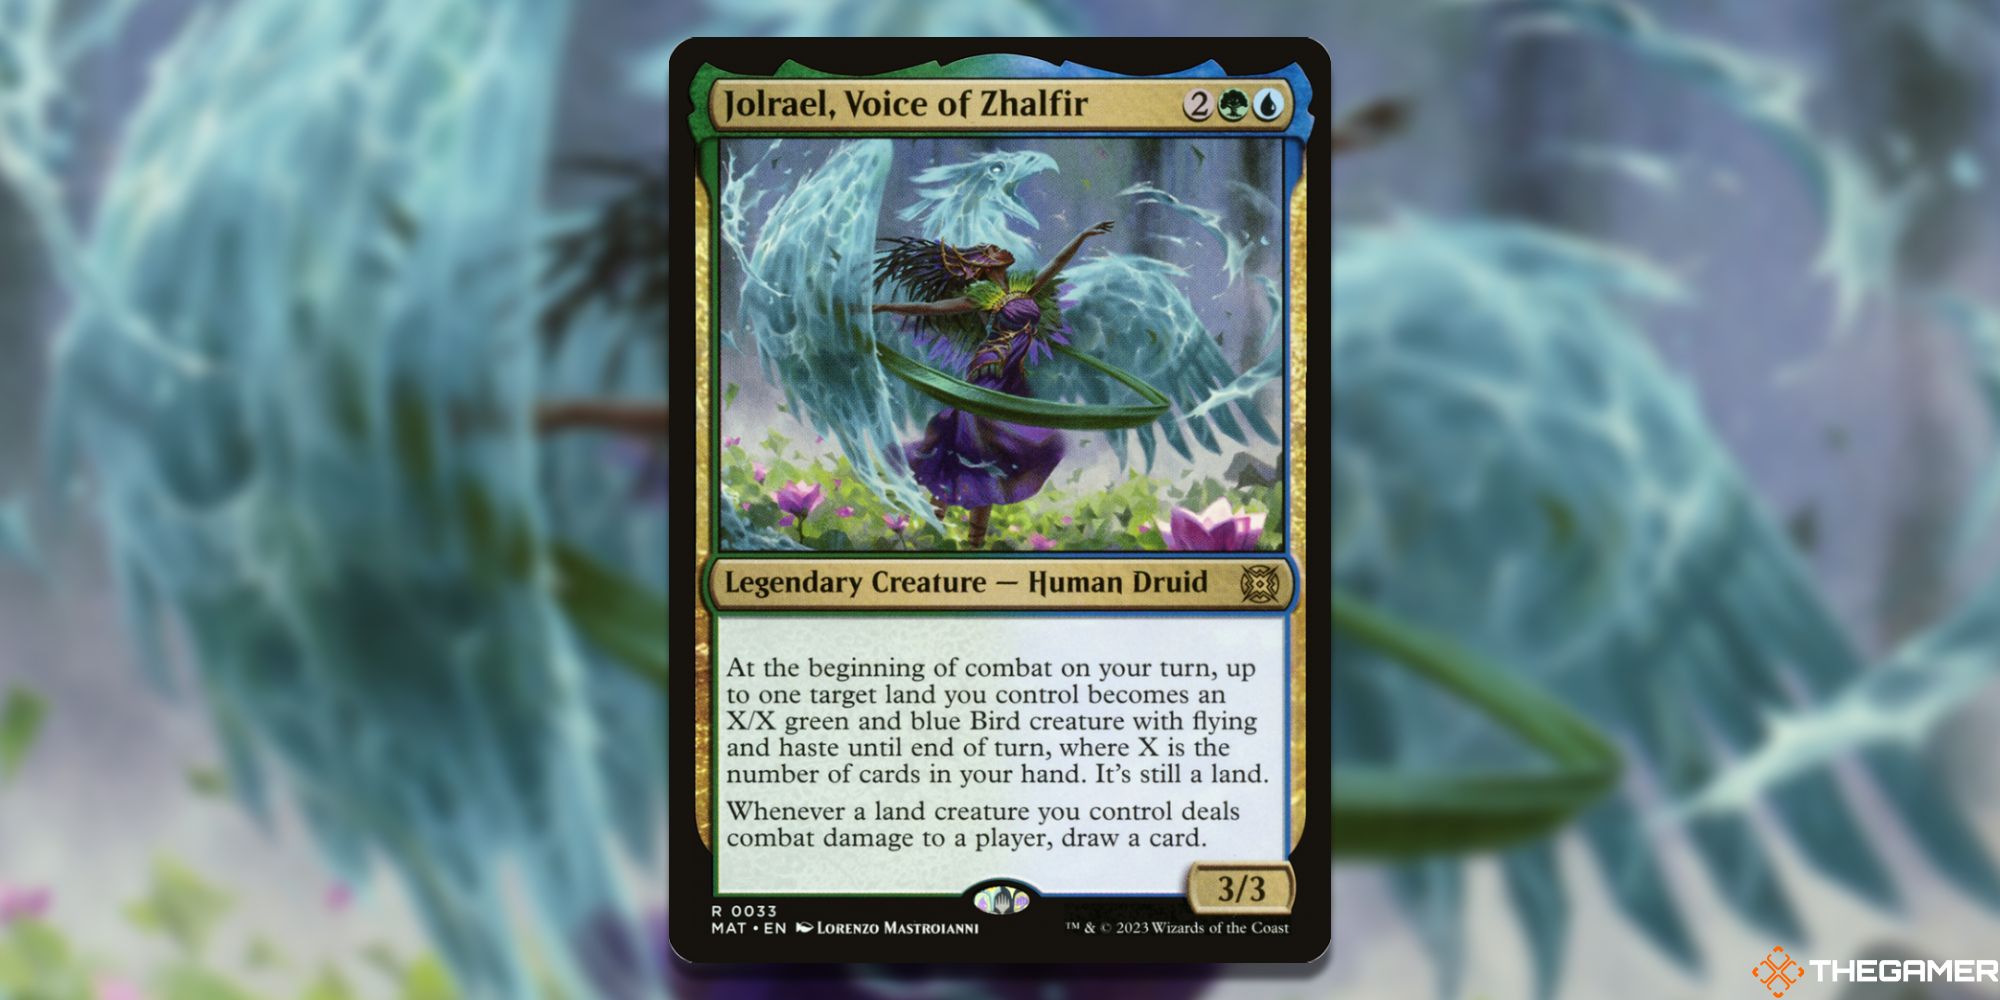 Image of the Jolrael, Voice of Zhalfir card in Magic: The Gathering, with art by Lorenzo Mastroianni